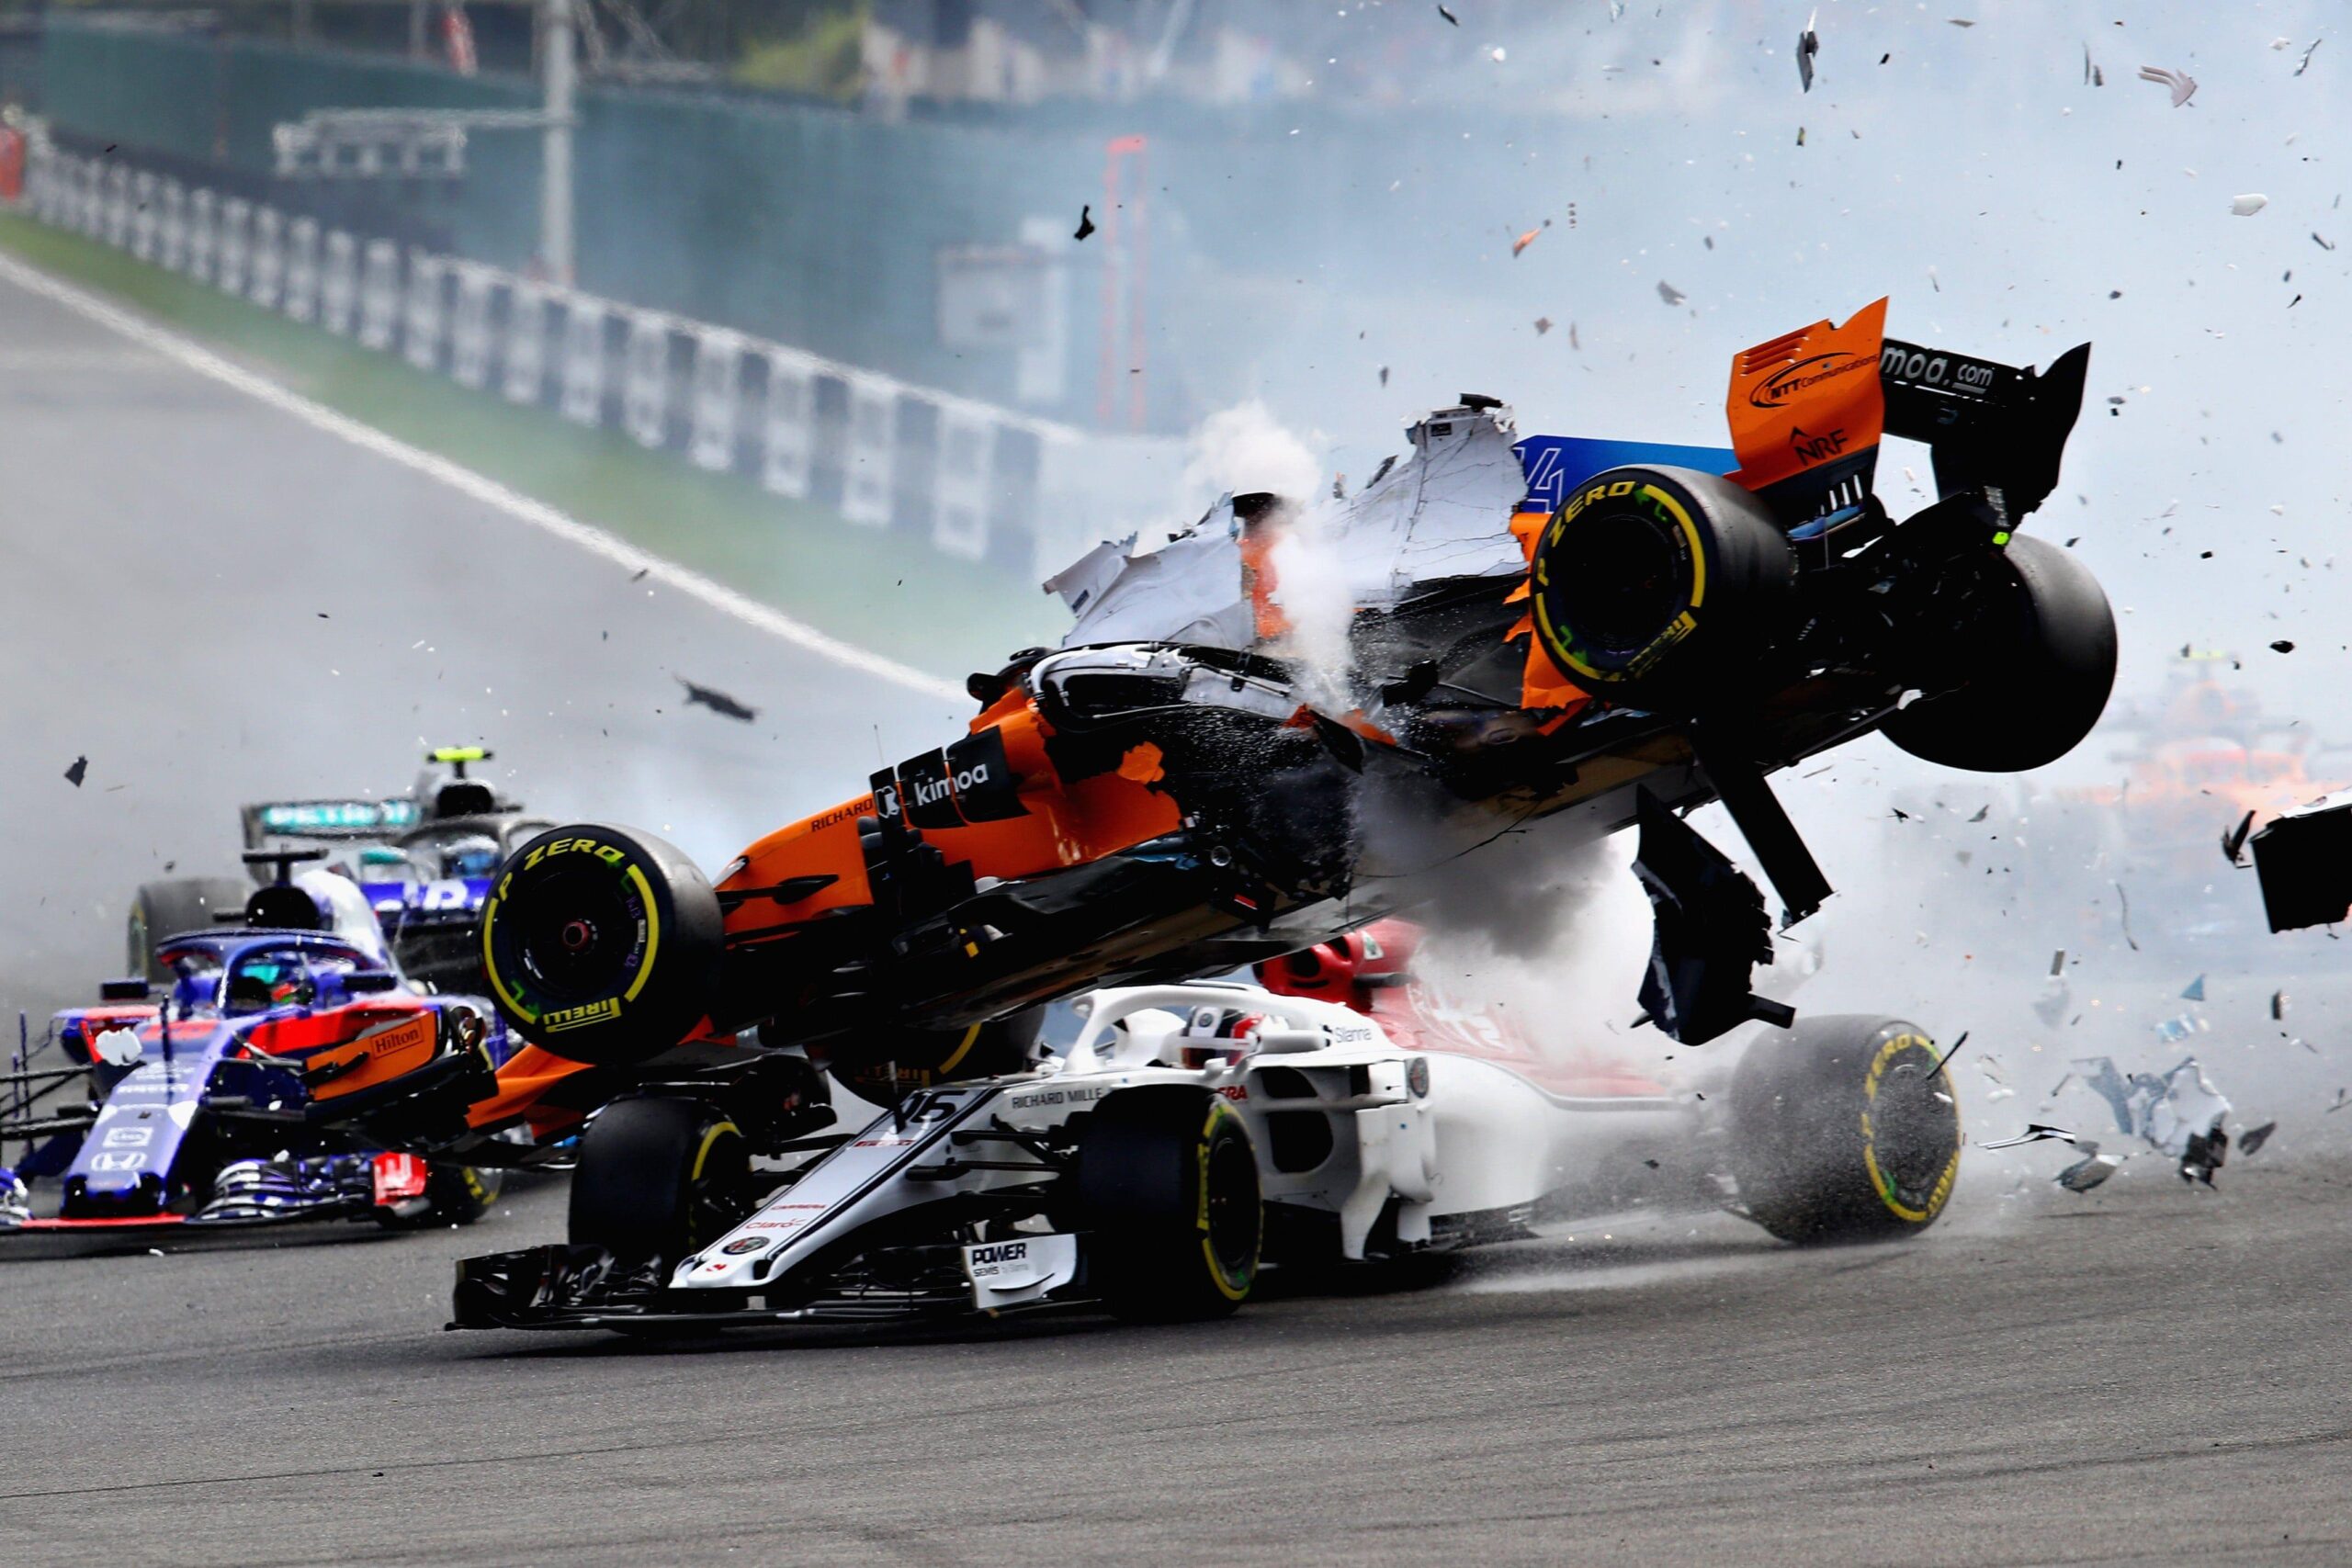 The Top 10 worst Formula One crashes in the last decade